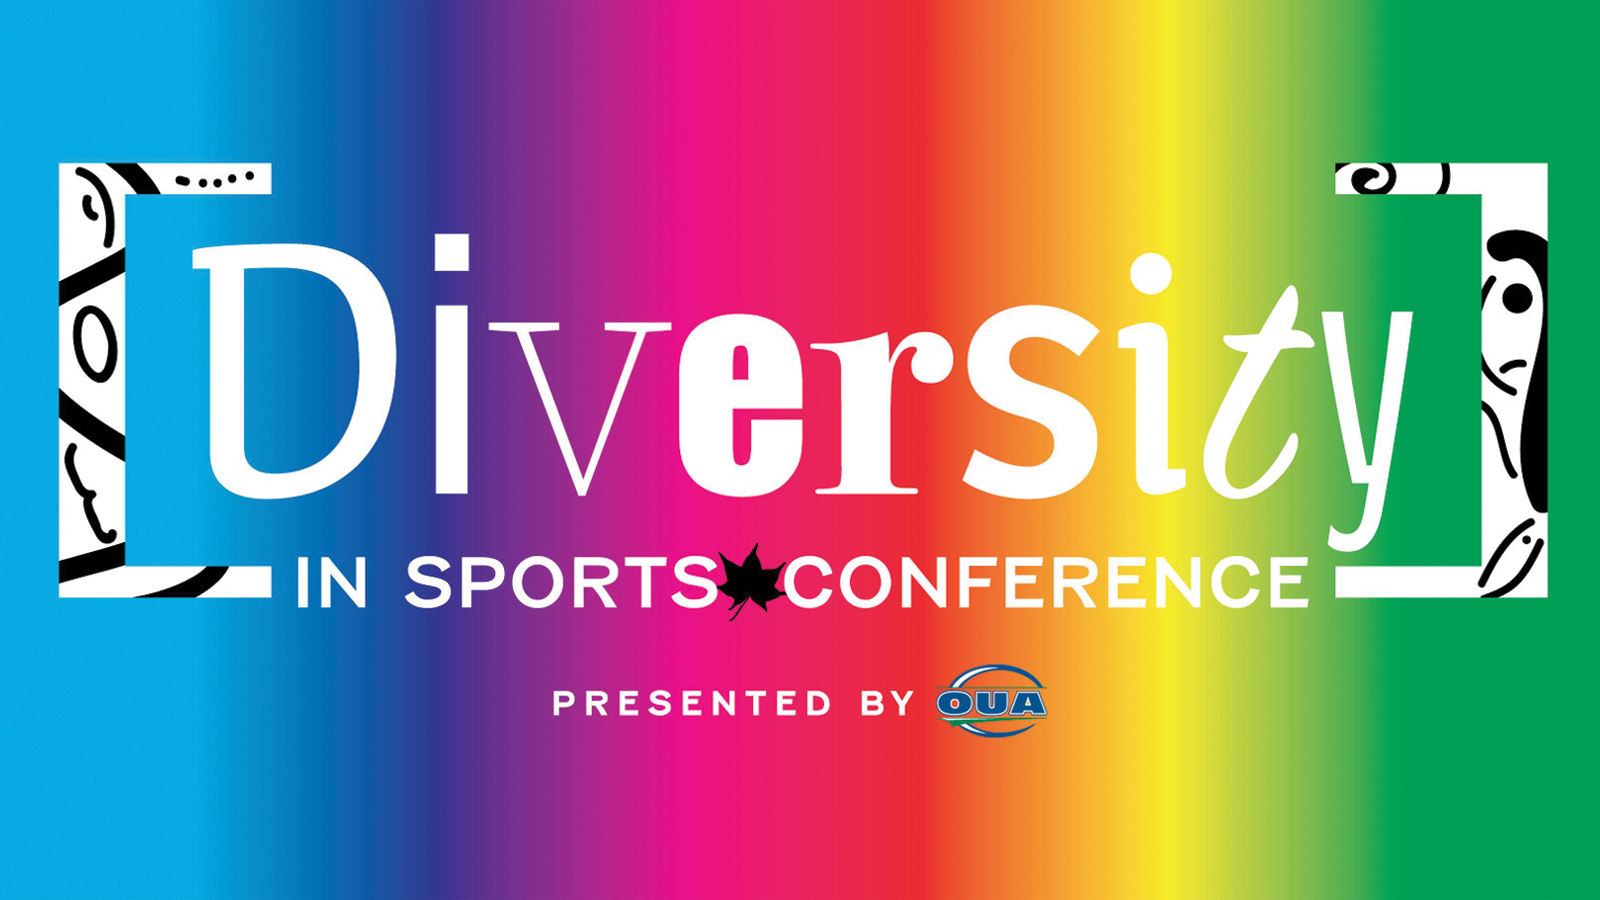 Diversity in Sports Conference logo, presented by OUA, one a rainbow coloured background